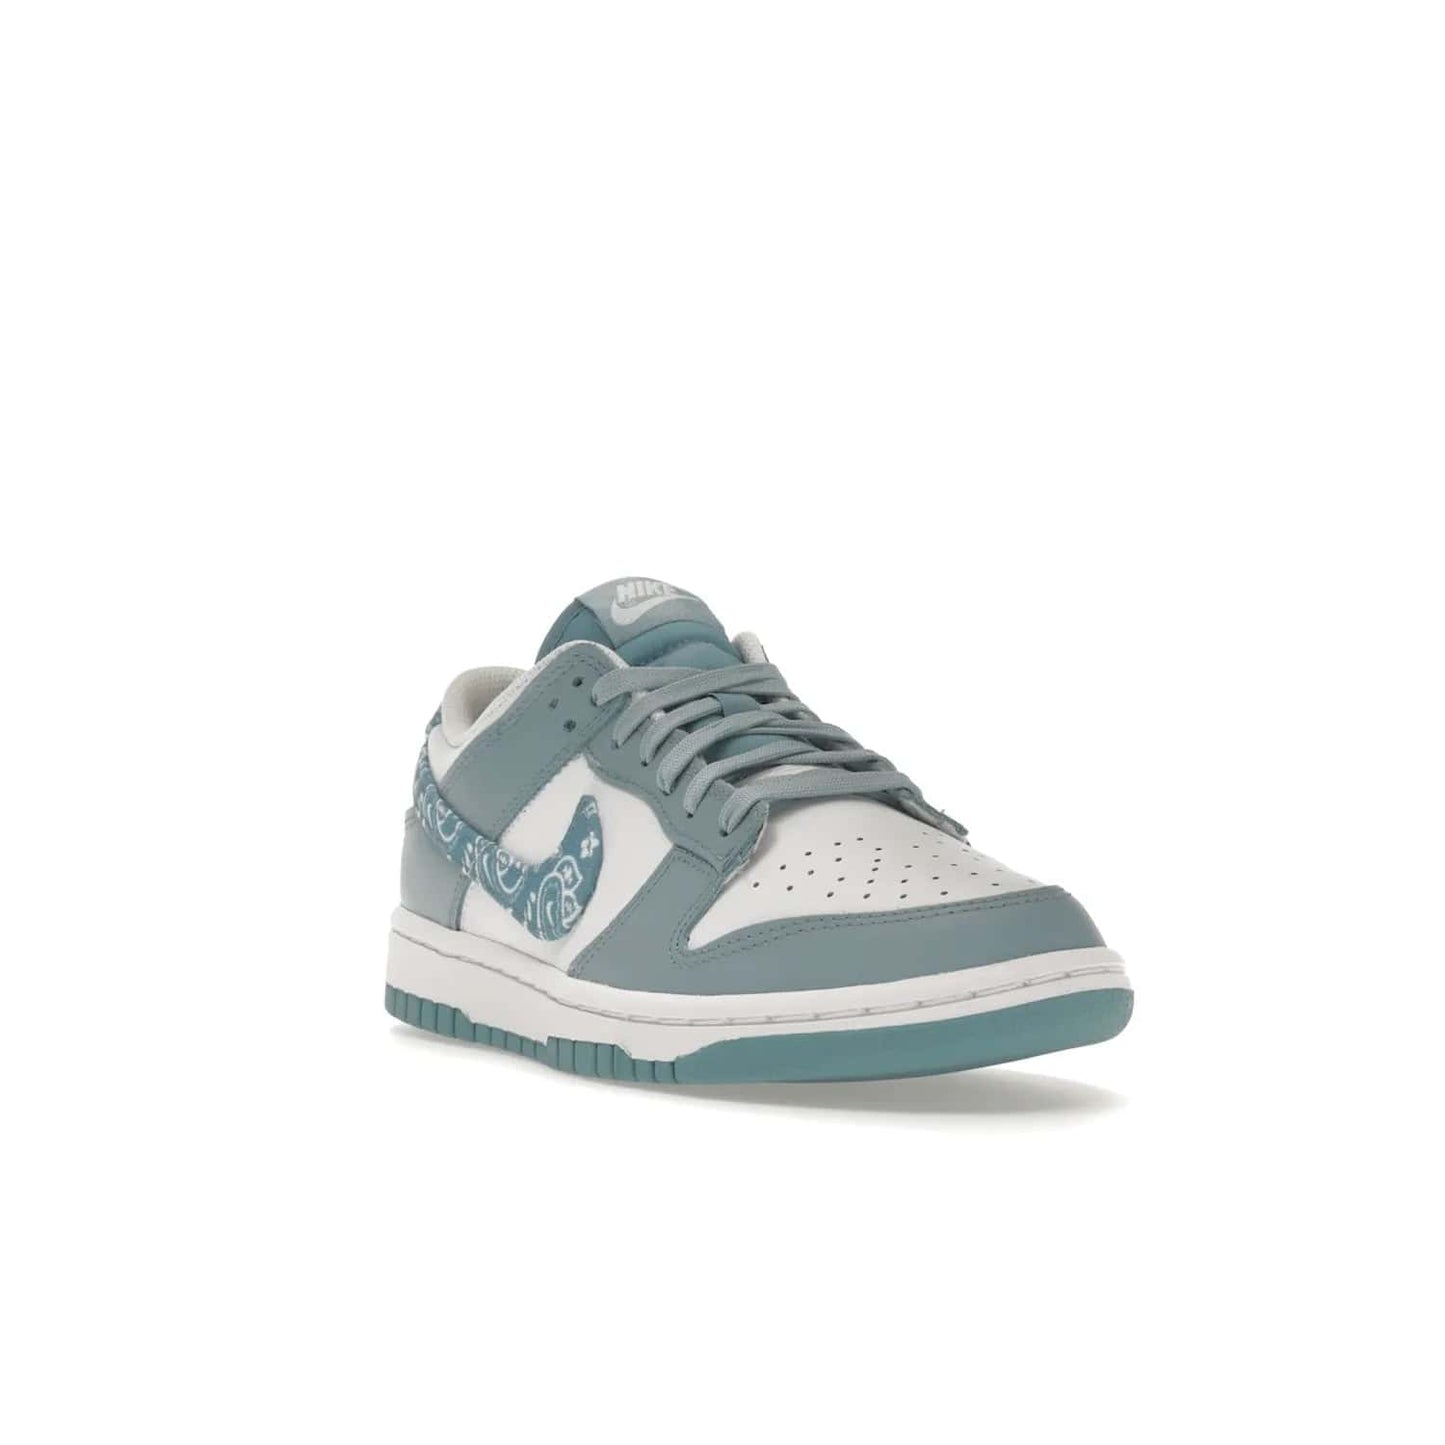 Nike Dunk Low Essential Paisley Pack Worn Blue (Women's) - Image 7 - Only at www.BallersClubKickz.com - Get the Nike Dunk Low Essential Paisley Pack Worn Blue (Women's) for style and comfort. White leather construction, light blue leather overlays, canvas Swooshes and matching heel tabs offer a rich blue hue. Finished by a white and light blue sole, this classic Nike Dunk is the perfect addition to any wardrobe. Released in March 2022.